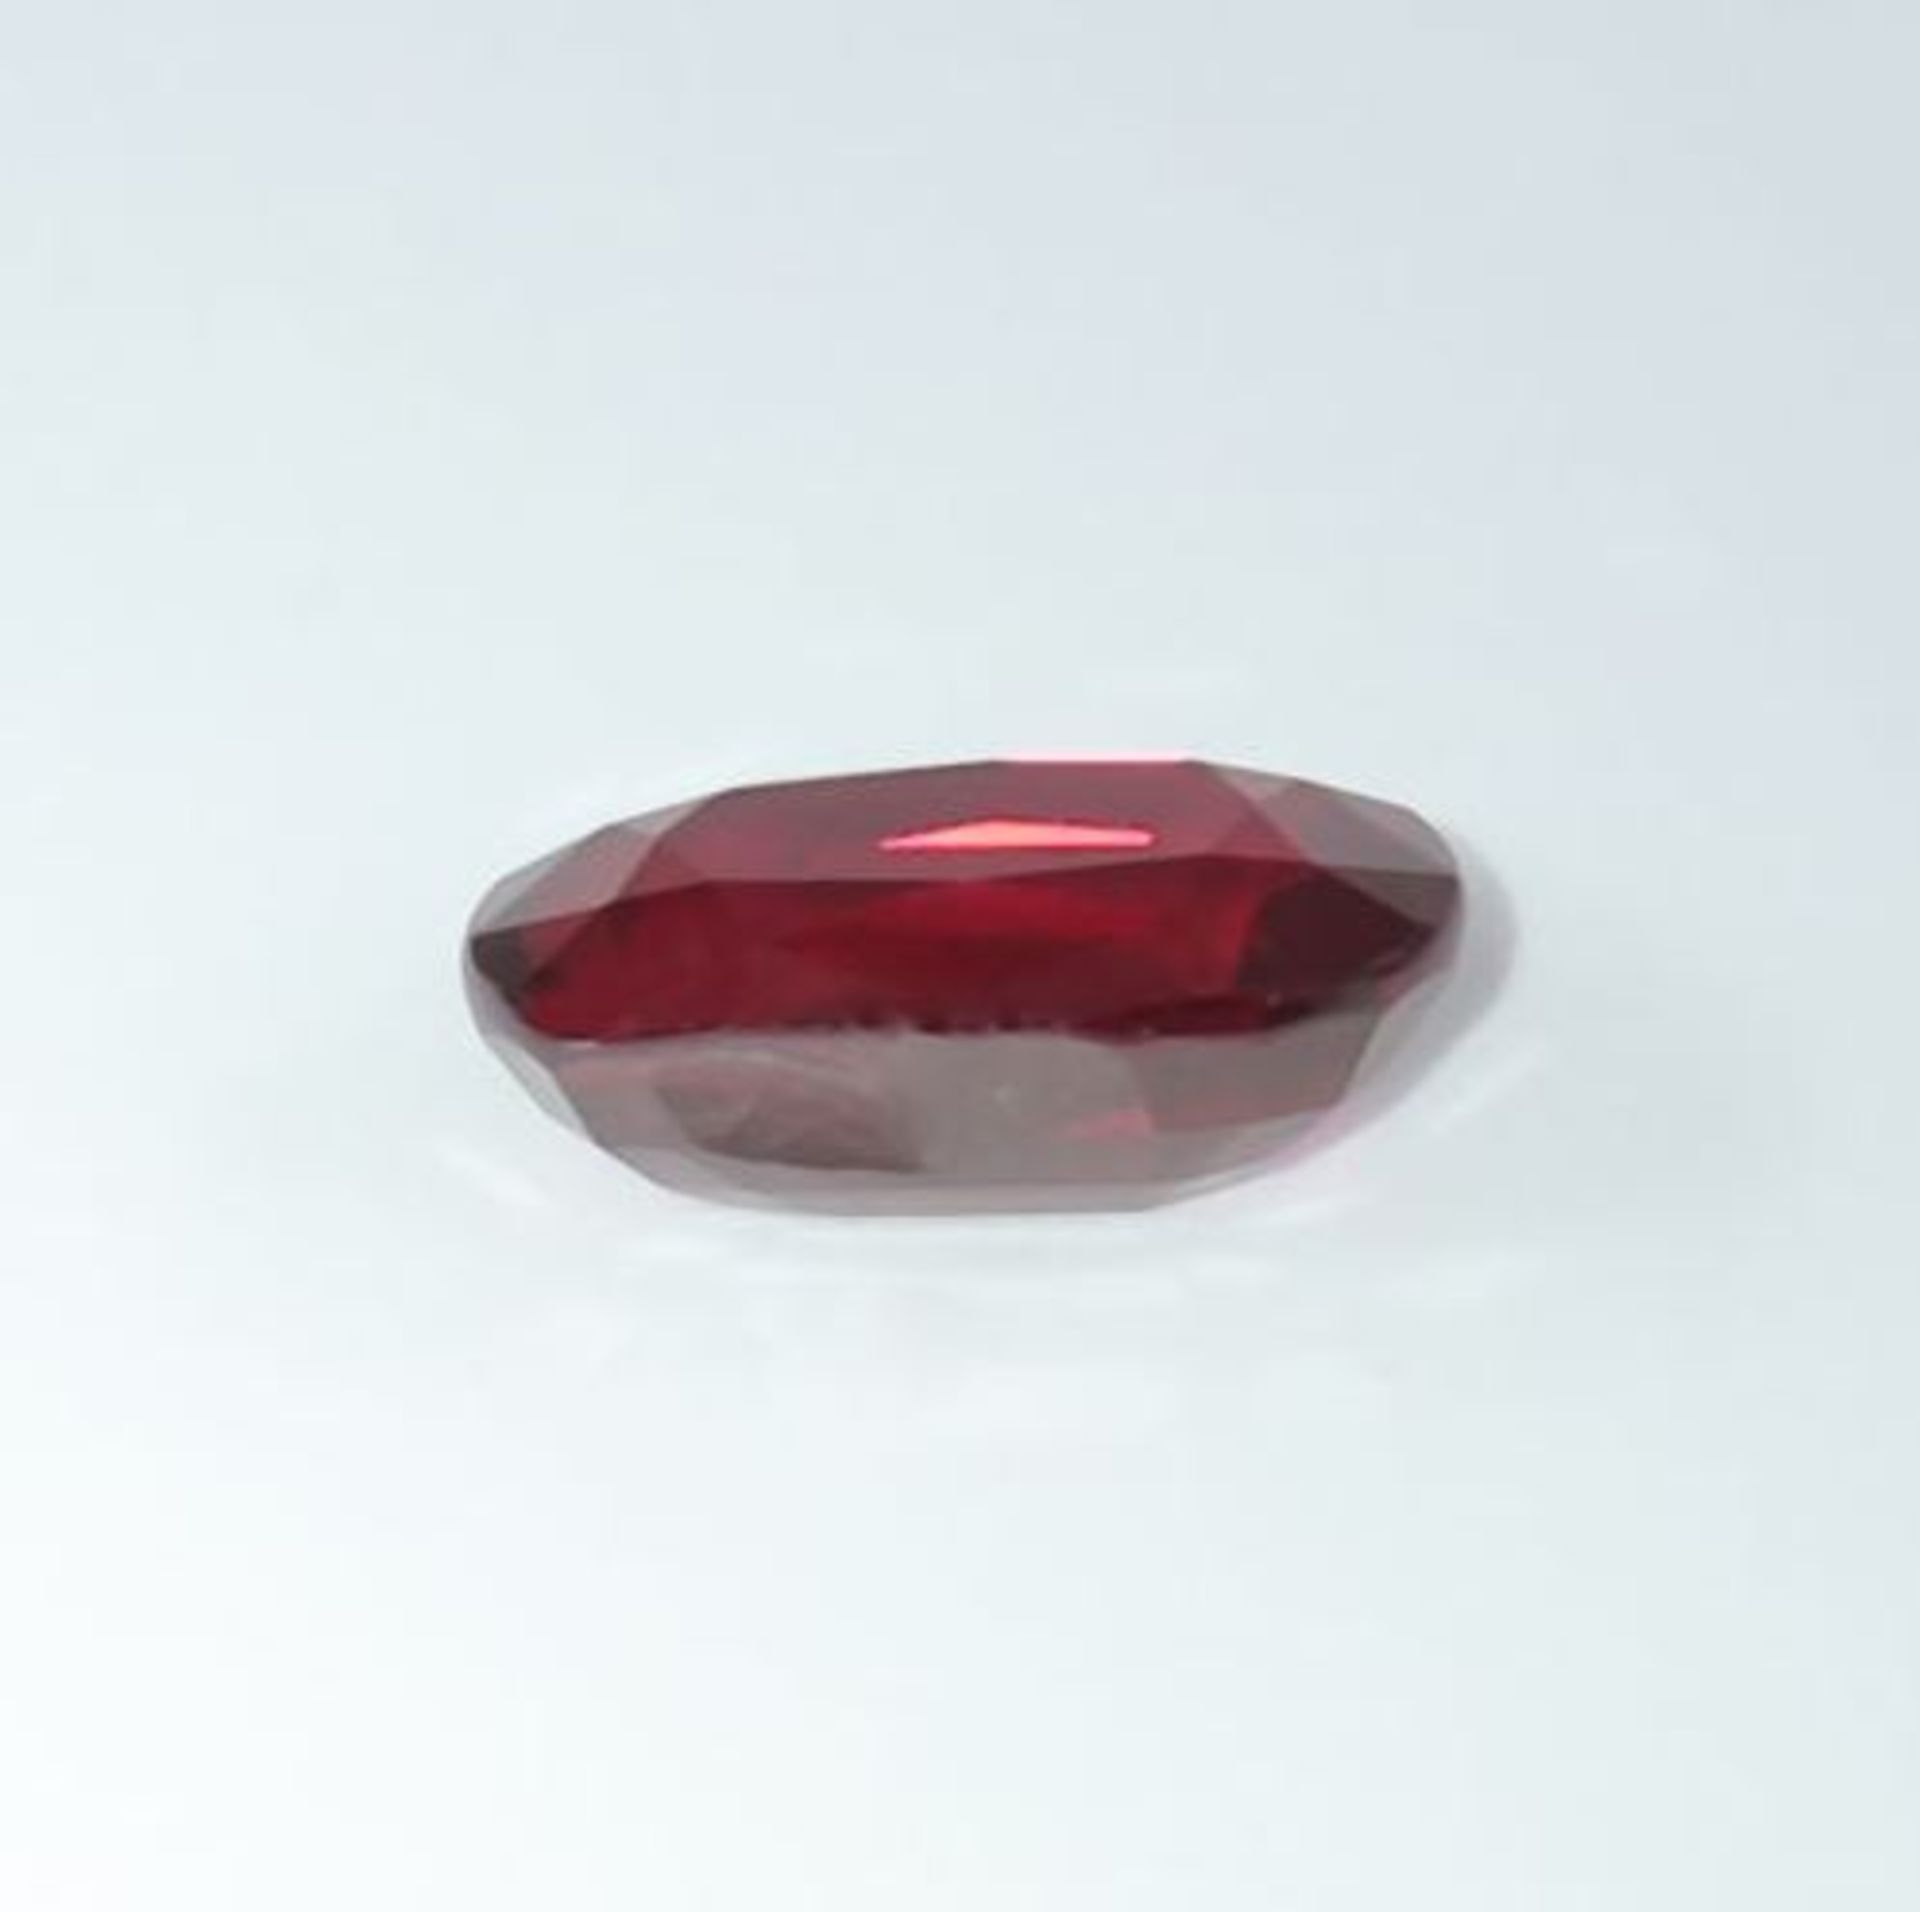 GRS Certified 5.02 ct. “Pigeon Blood” Ruby - Image 7 of 10